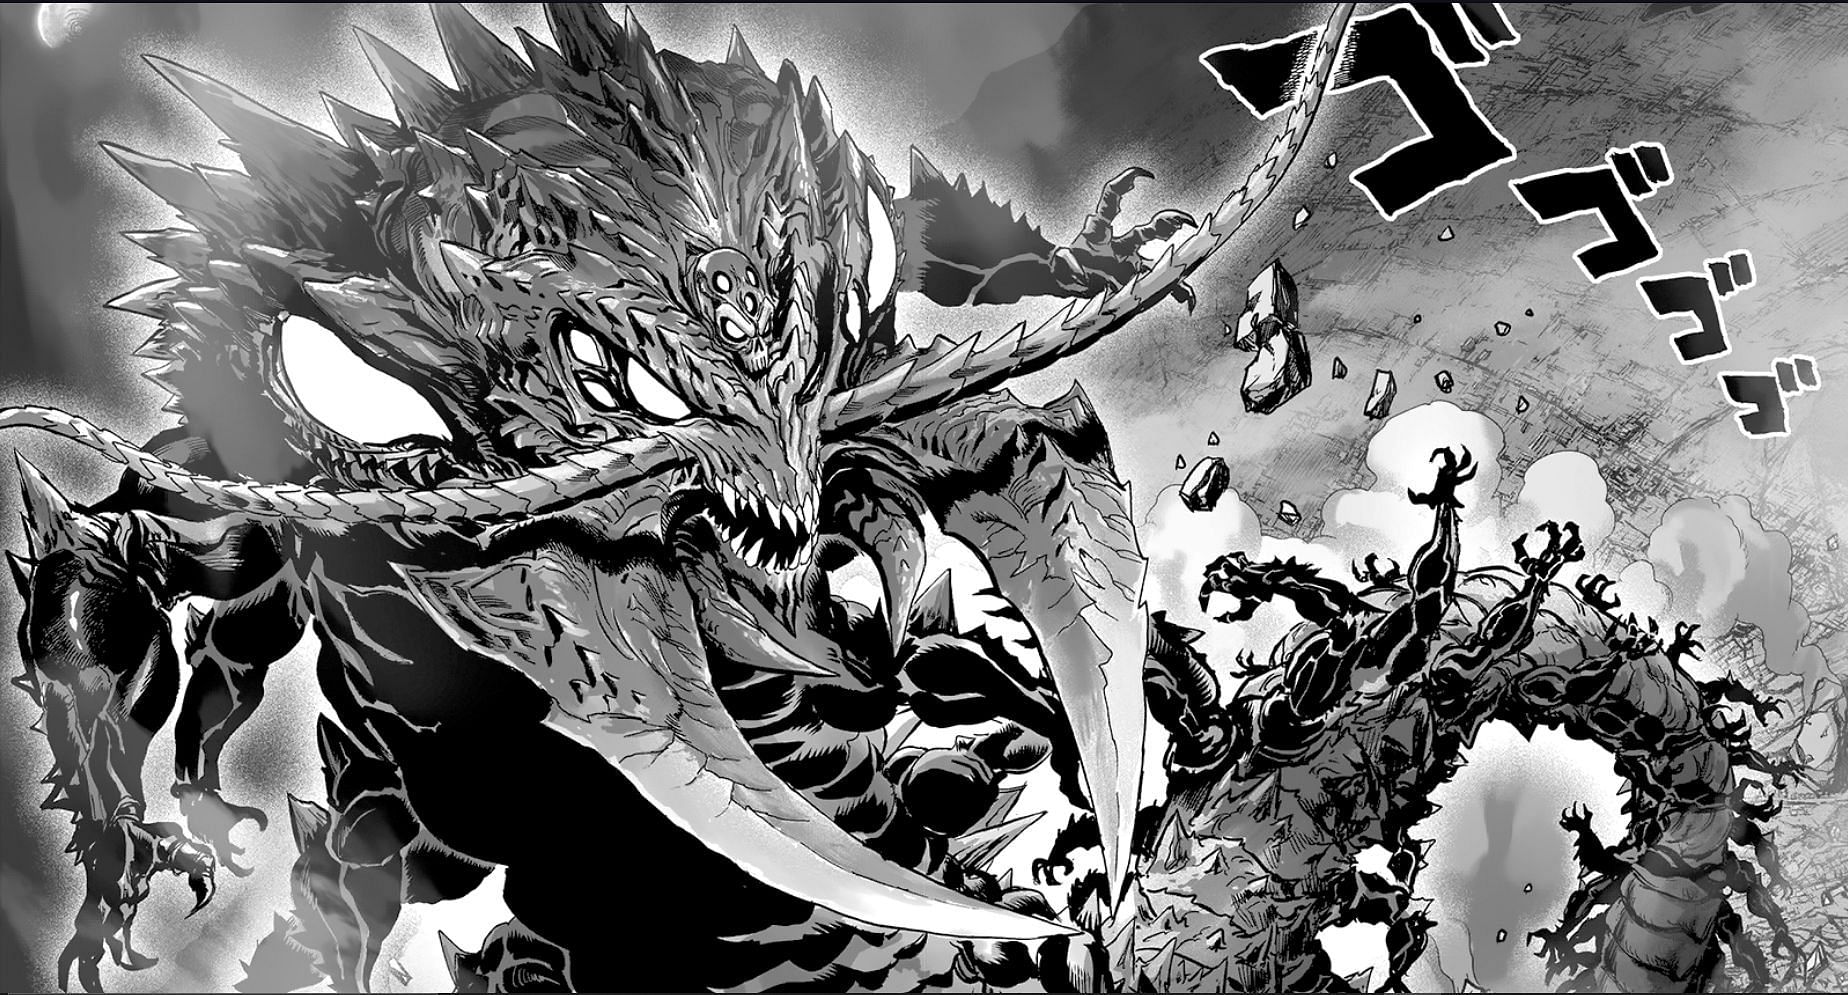 One Punch Man Chapter 156 features God and Blast revealing new information (Image via Yusuke Murata)